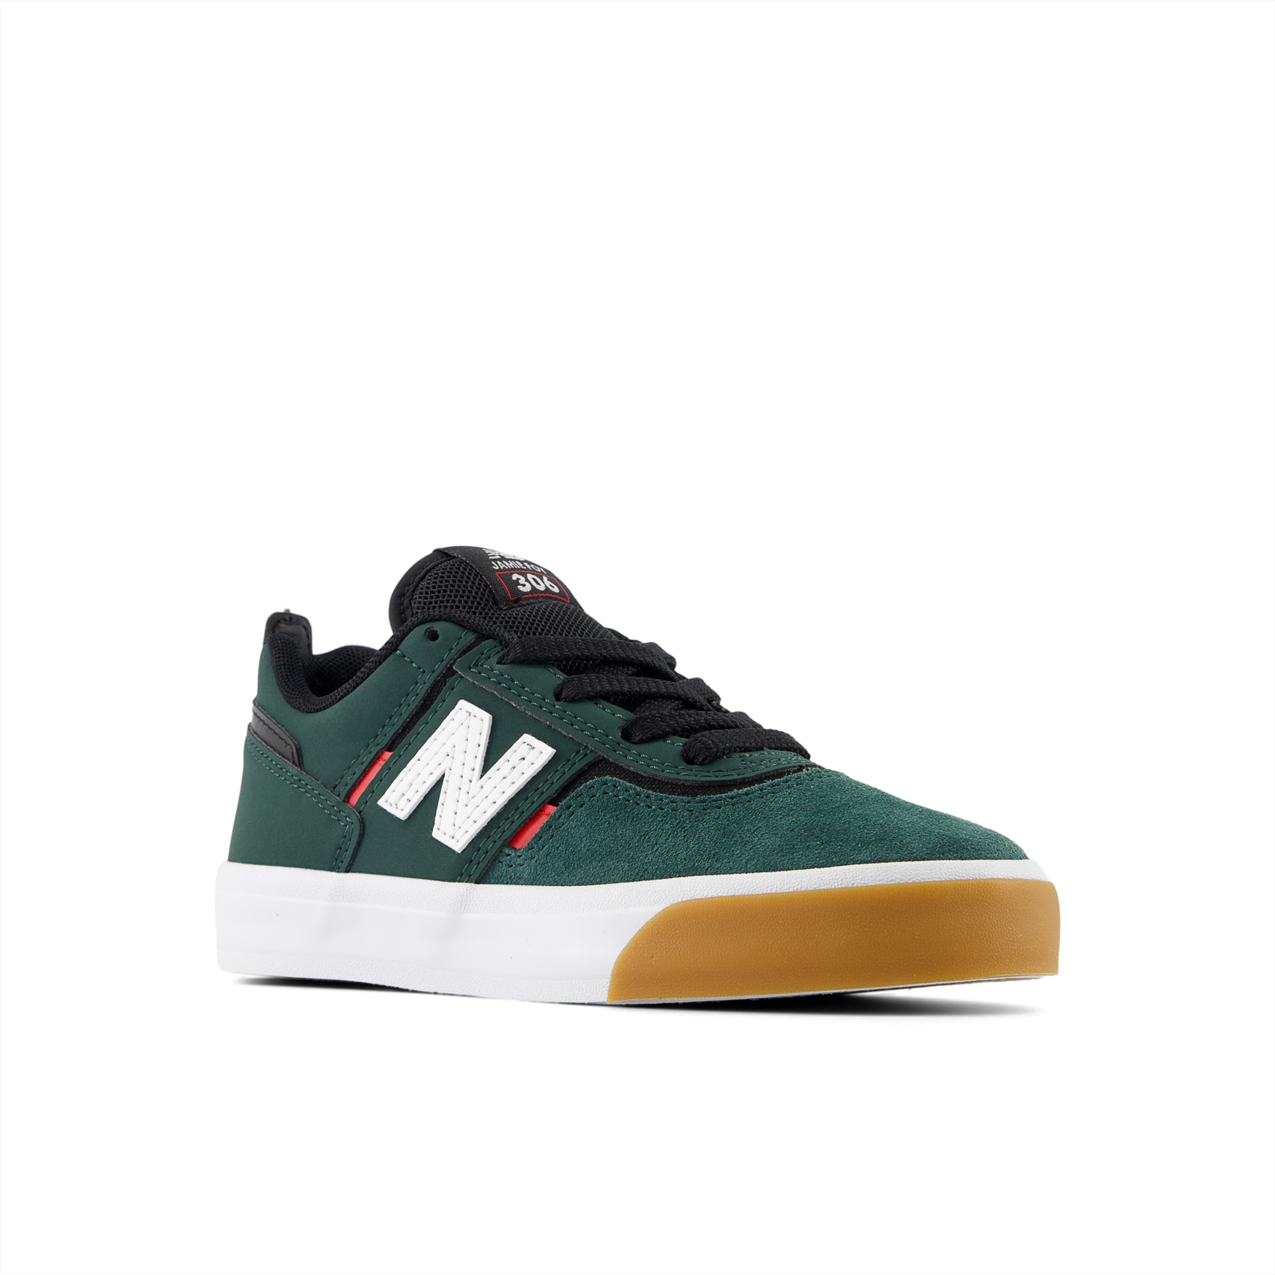 New Balance Numeric Kids Jamie Foy 306 Forest Green White Shoes